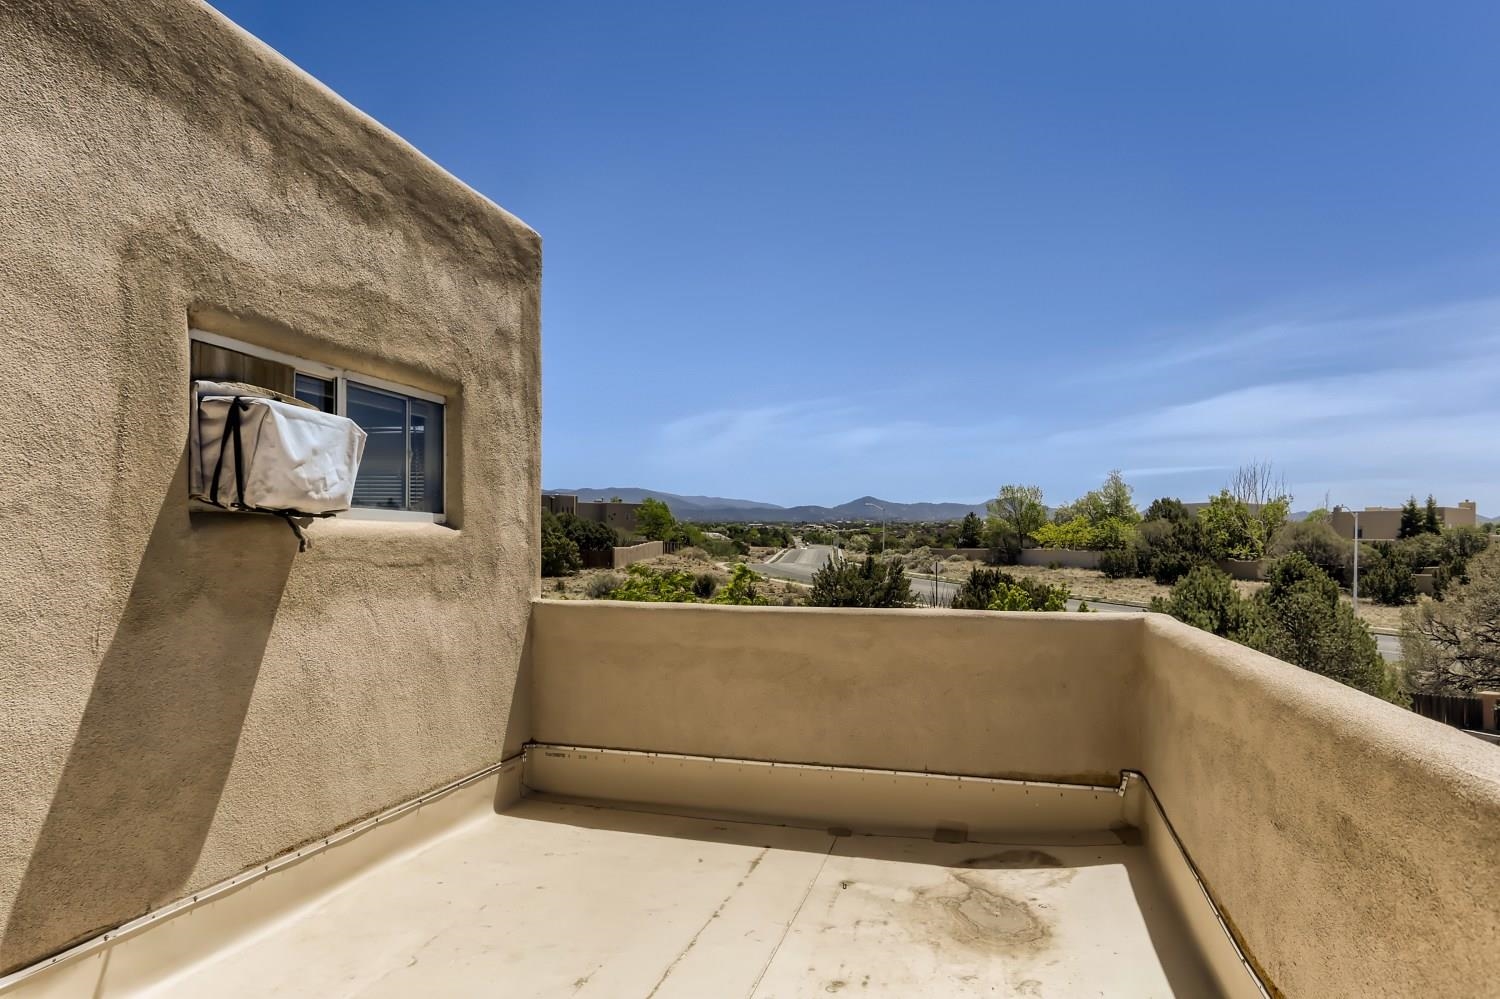 3040 Cliff Palace, Santa Fe, New Mexico 87507, 3 Bedrooms Bedrooms, ,2 BathroomsBathrooms,Residential,For Sale,3040 Cliff Palace,202201785